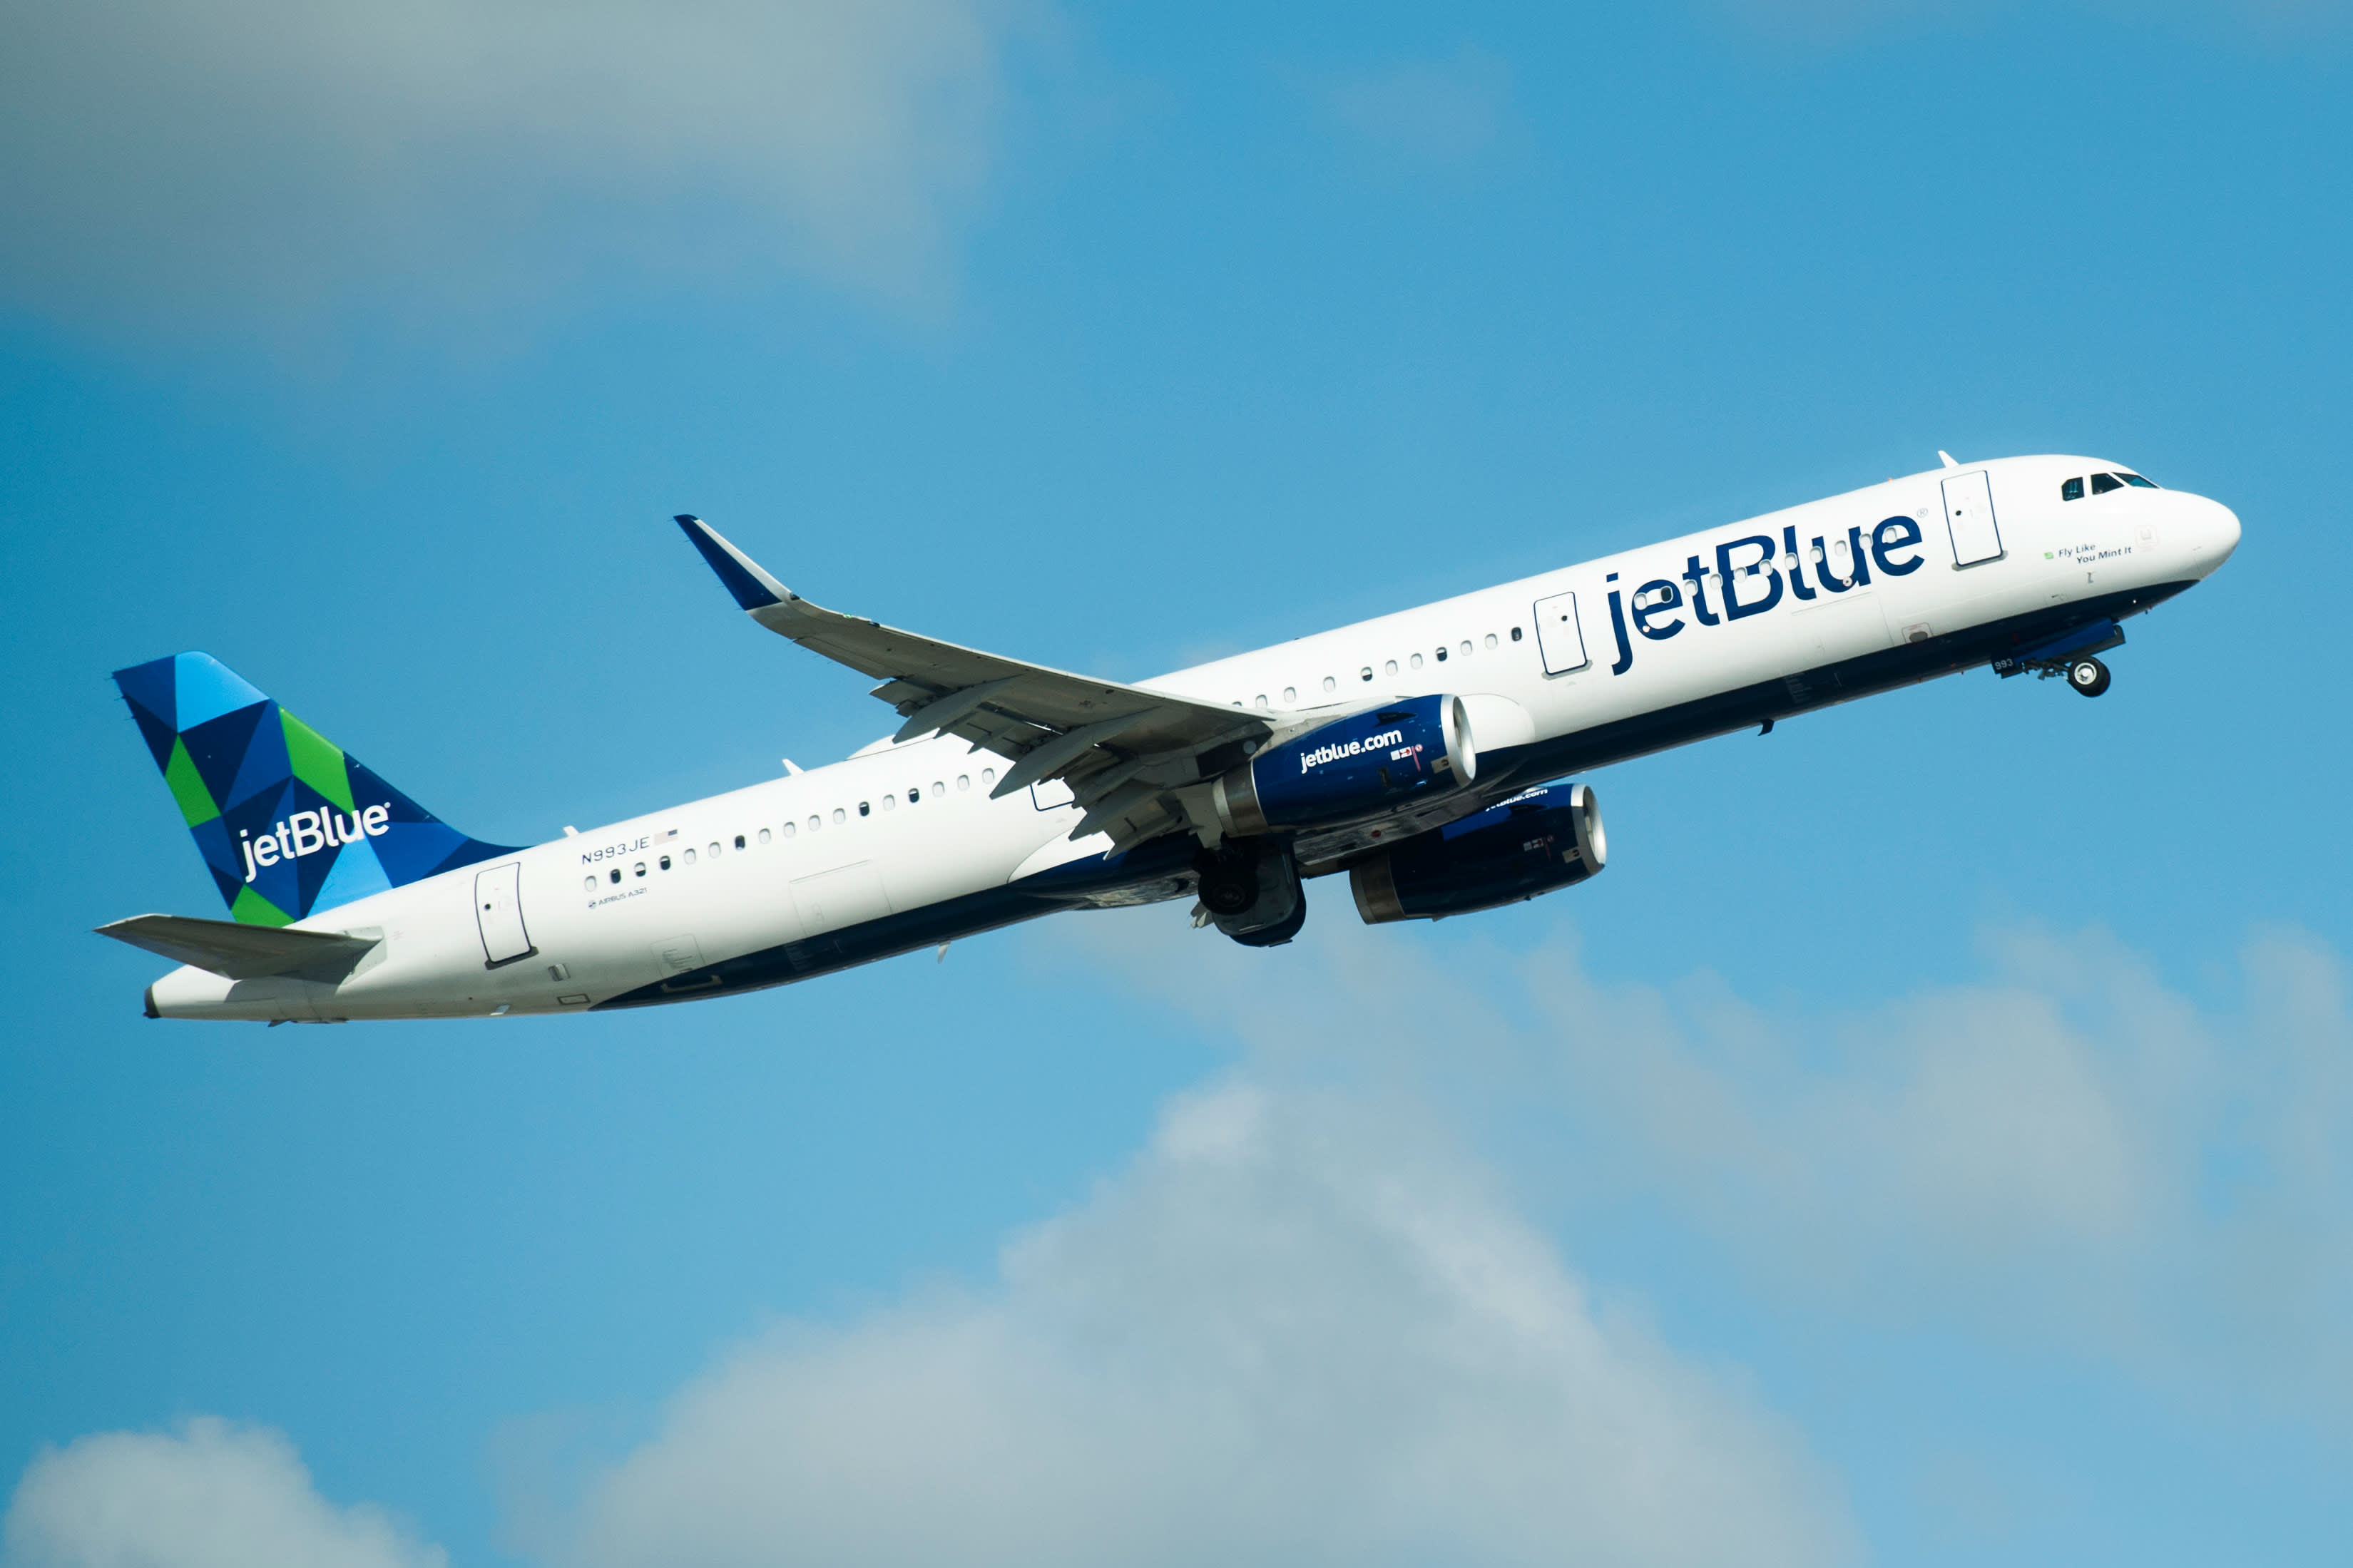 JetBlue announces new routes to Florida and Latin America for 2021